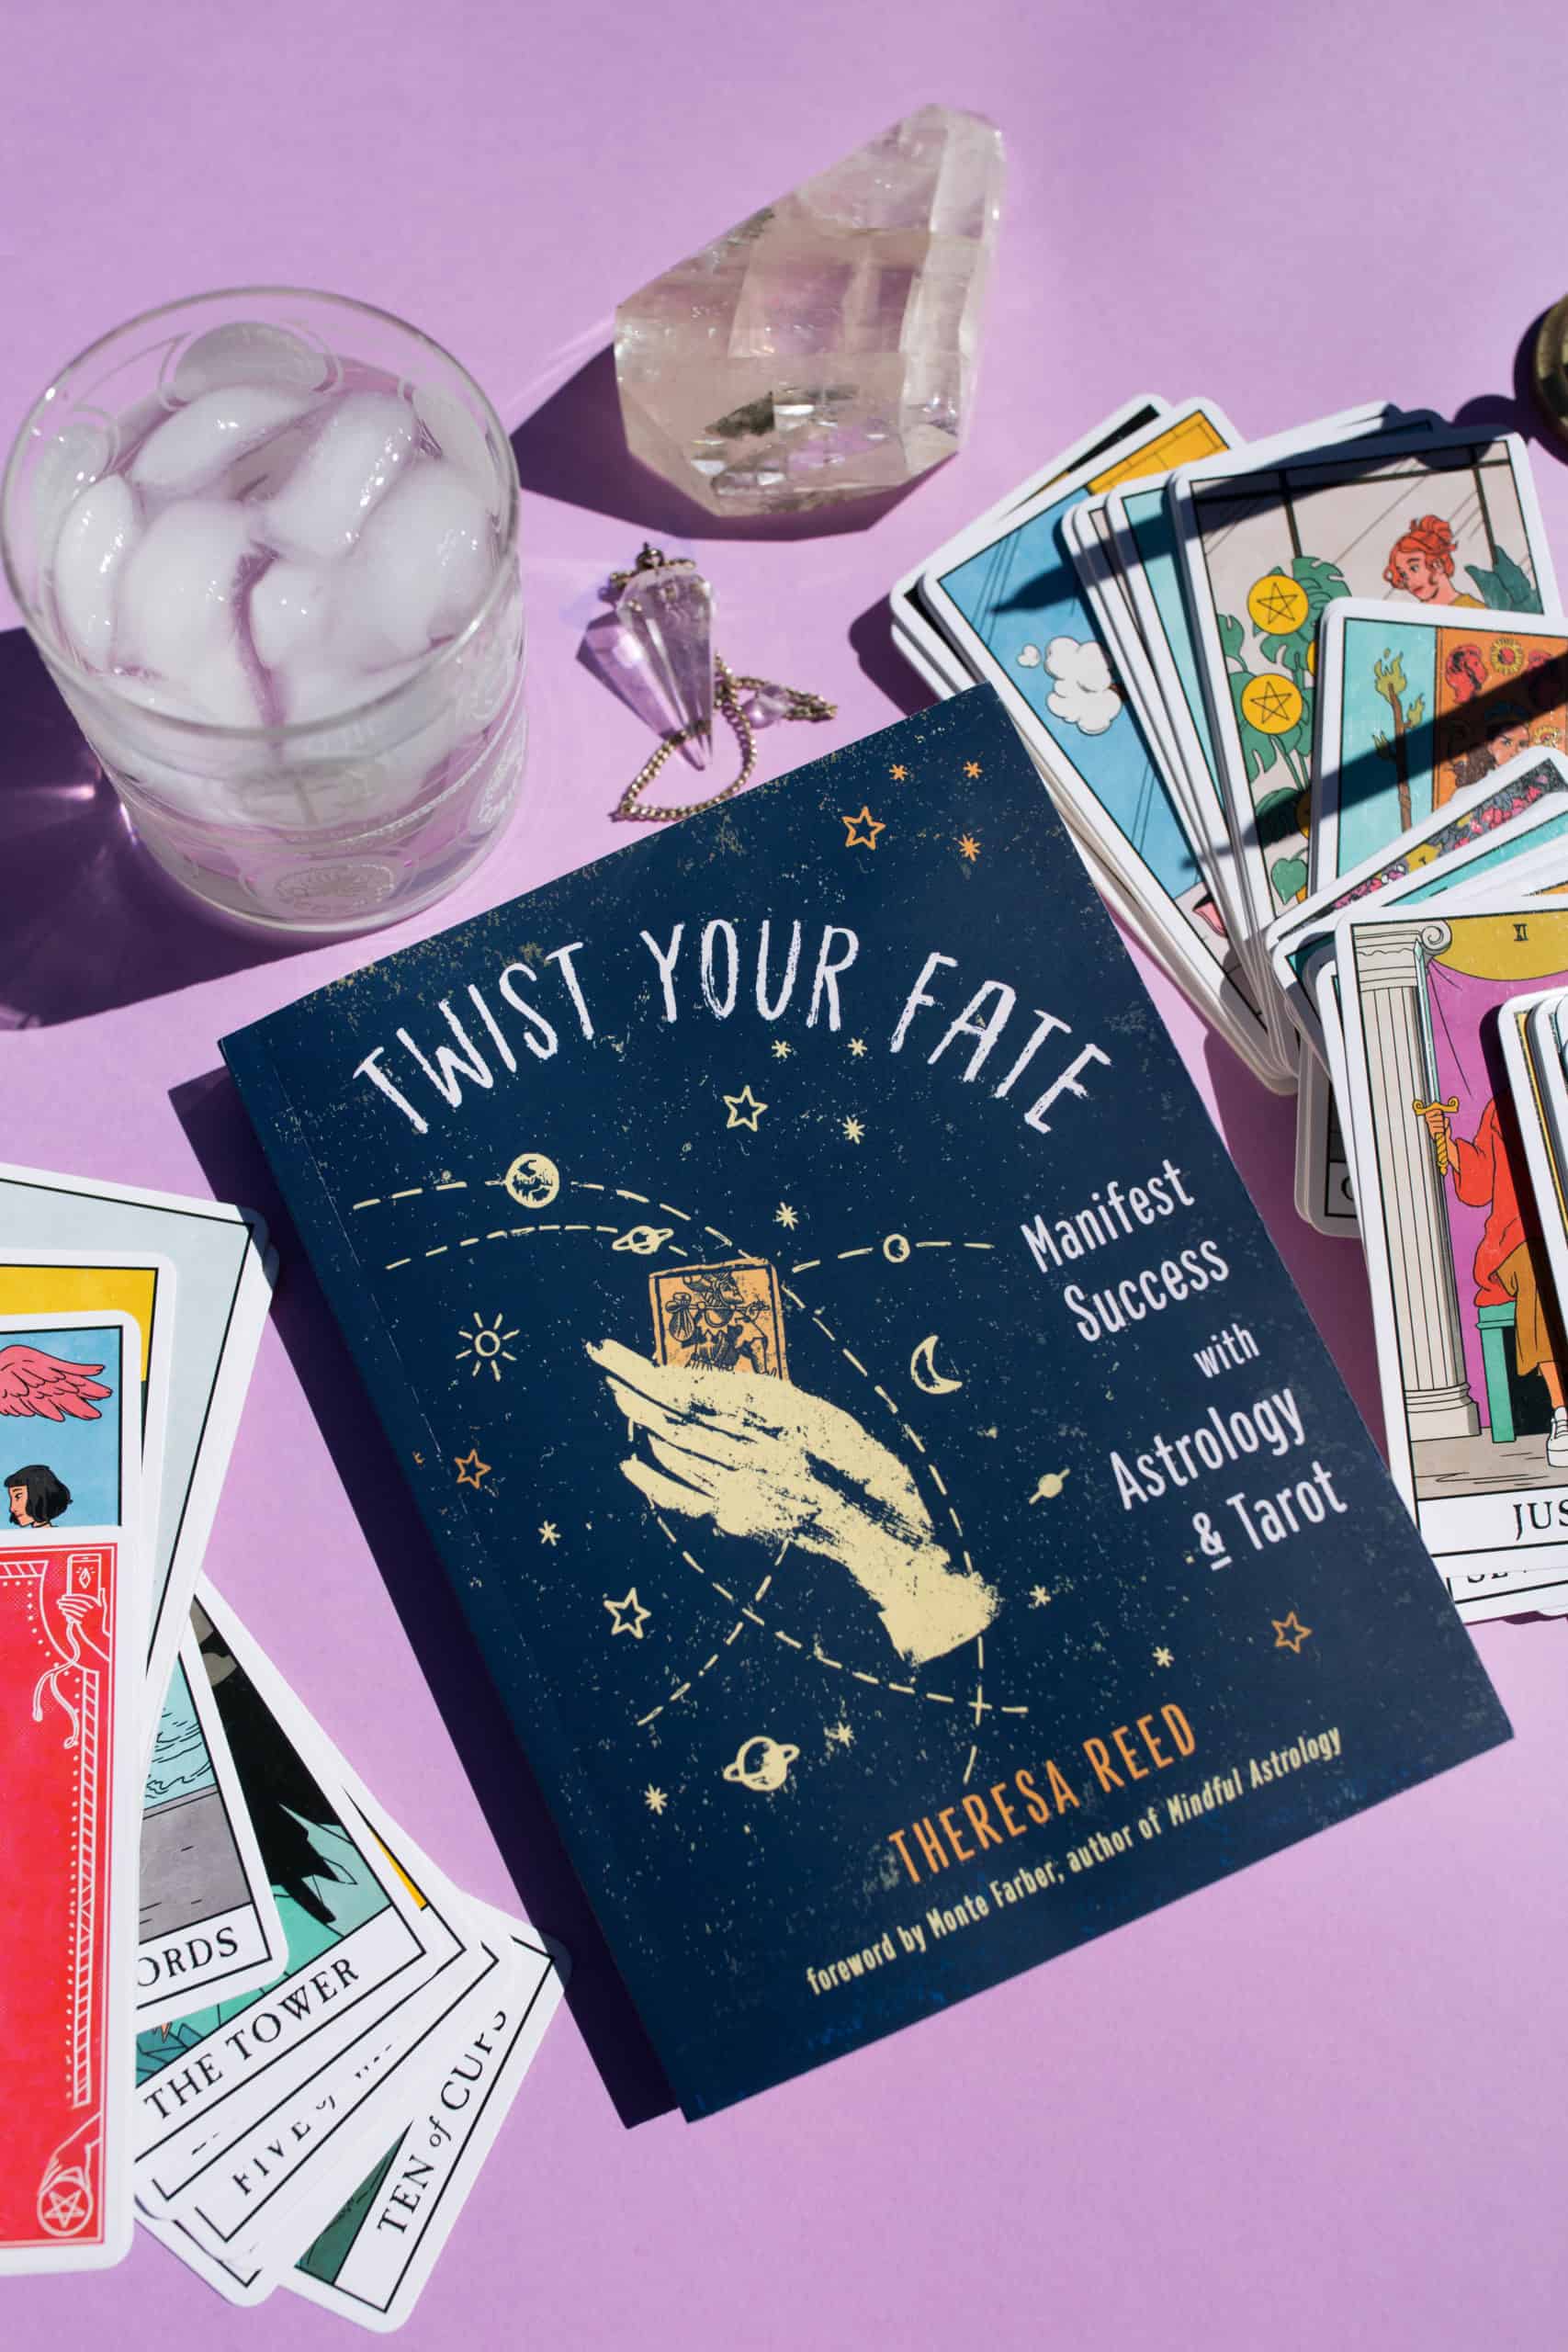 Tarot: No Questions Asked - Mastering the Art of Intuitive Reading 